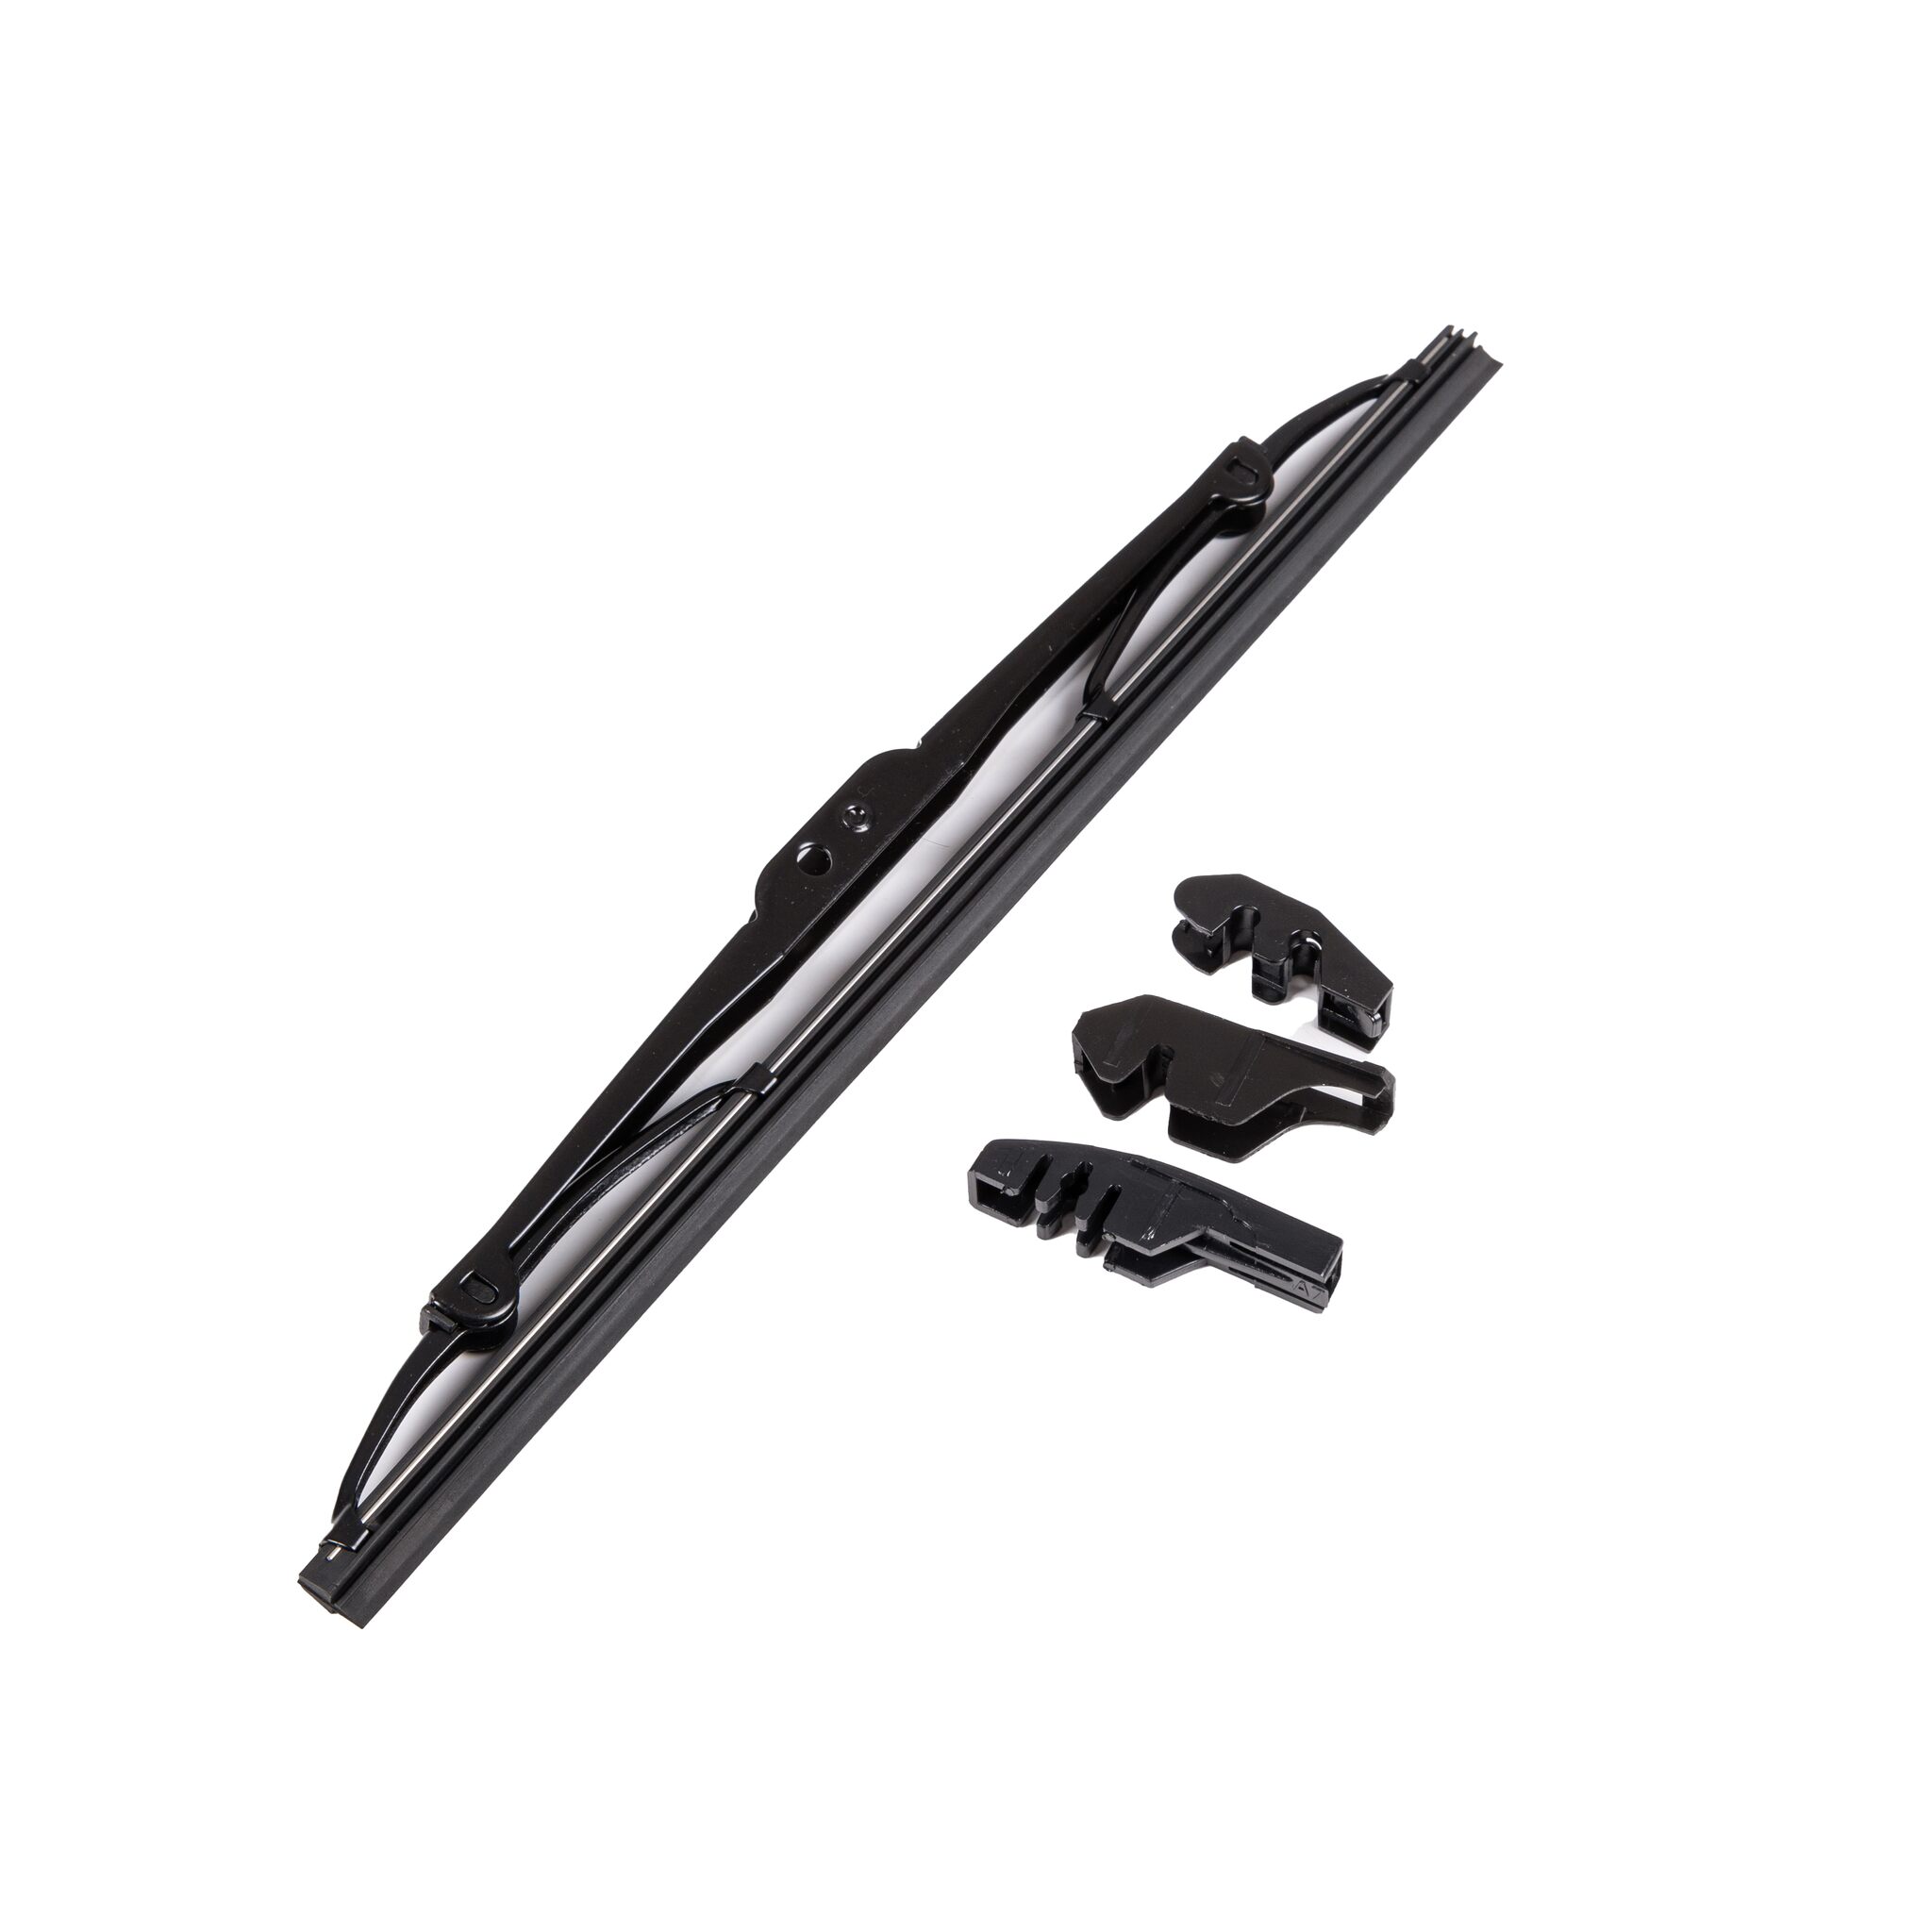 Replacement for ROCA wiper blade, 280 mm